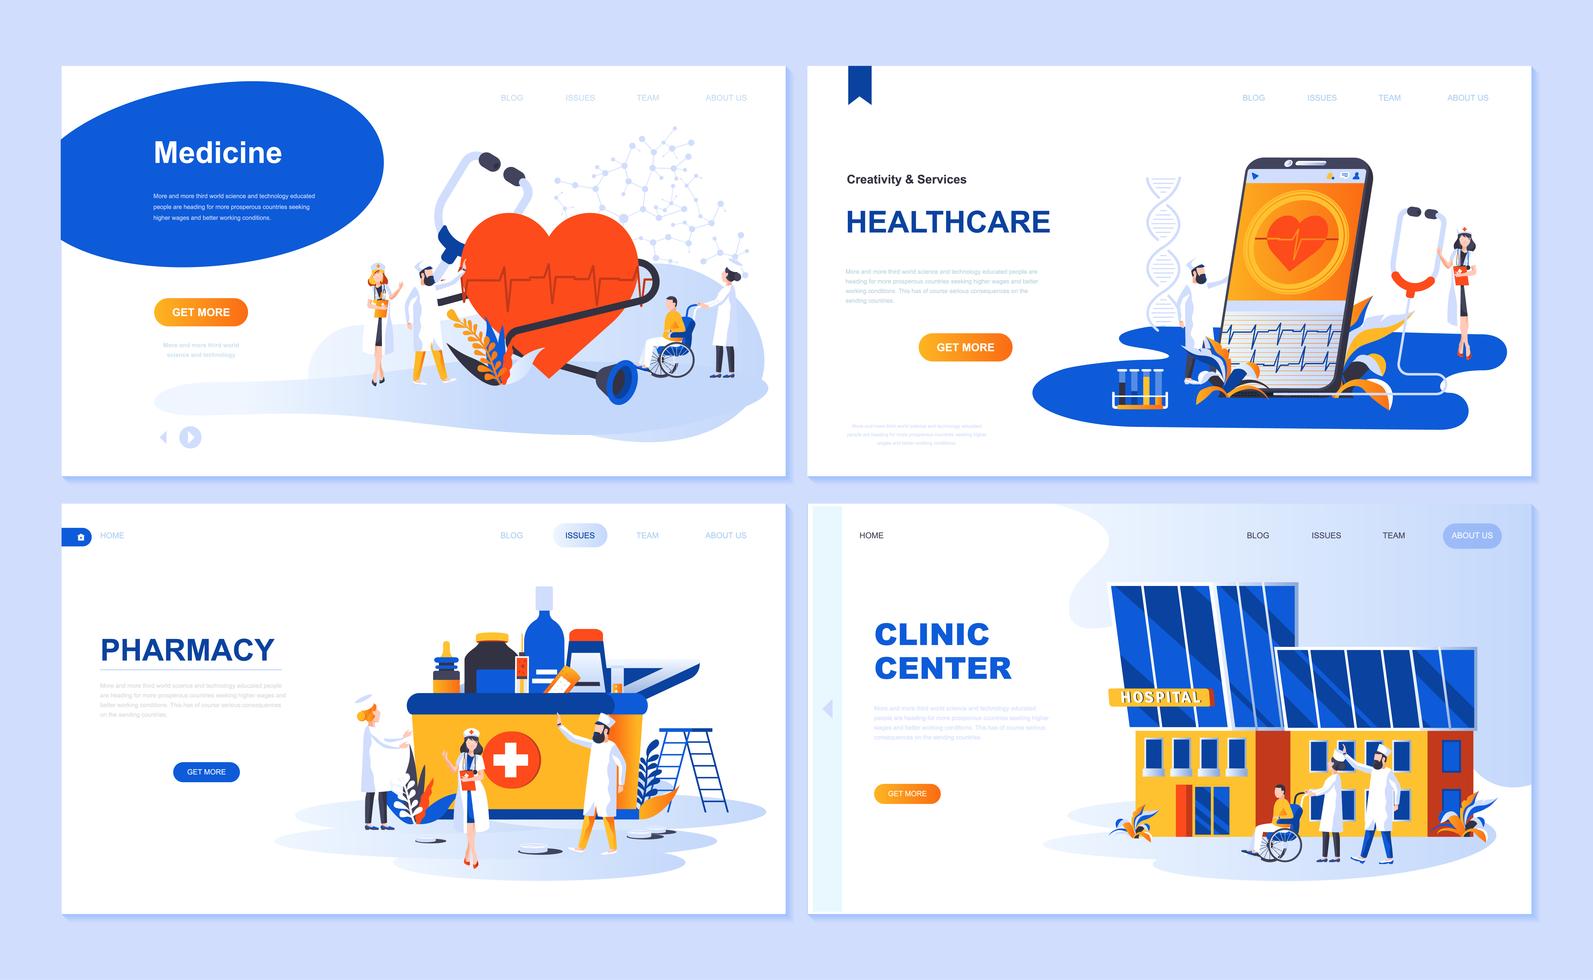 Set of landing page template for Medicine, Healthcare, Pharmacy, Clinic Center. Modern vector illustration flat concepts decorated people character for website and mobile website development.